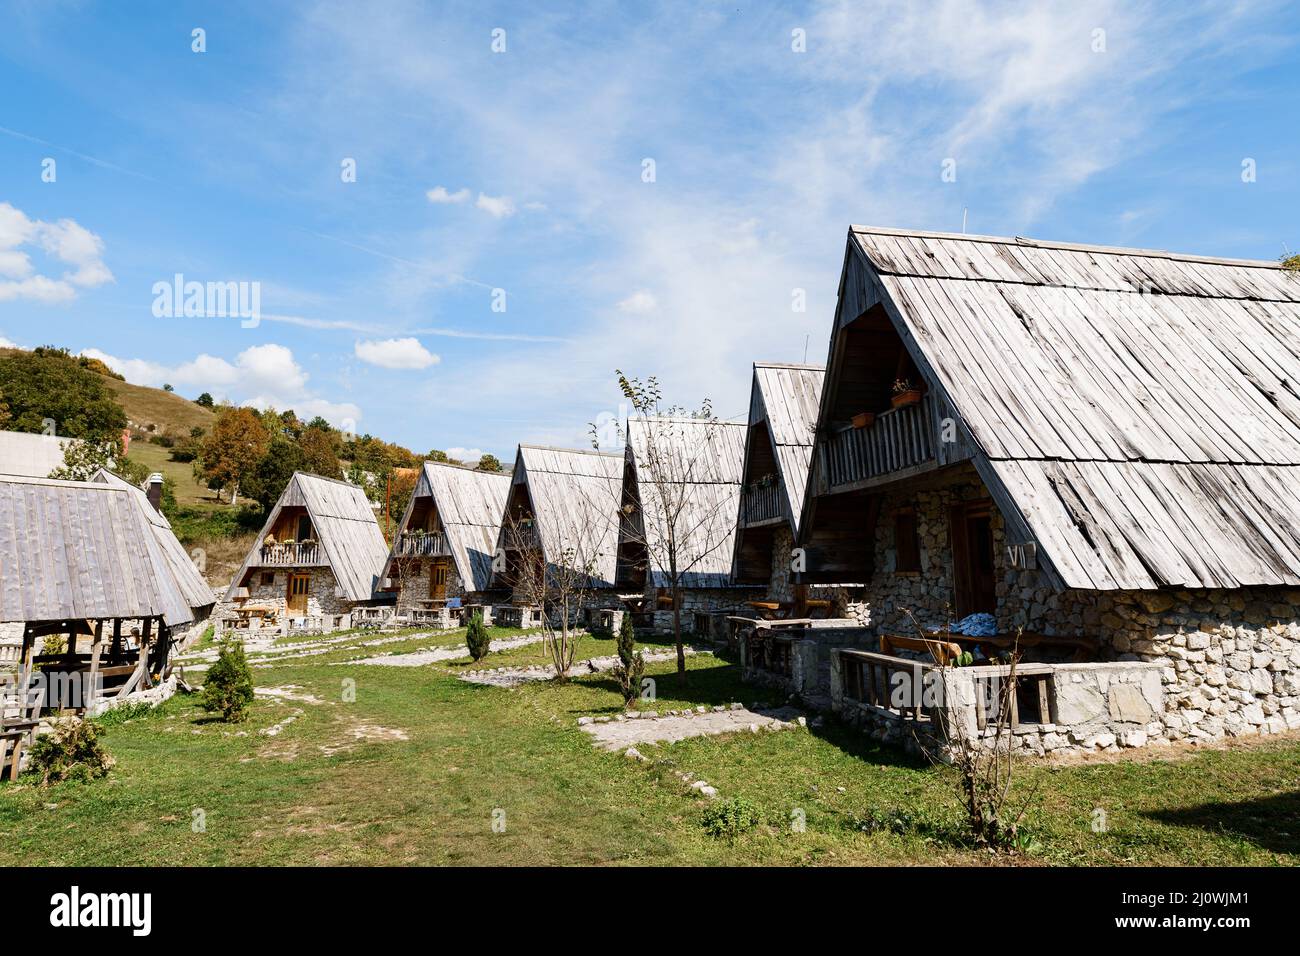 Triangular stone houses with wooden roofs against the backdrop of mountains. Montenegro Stock Photo